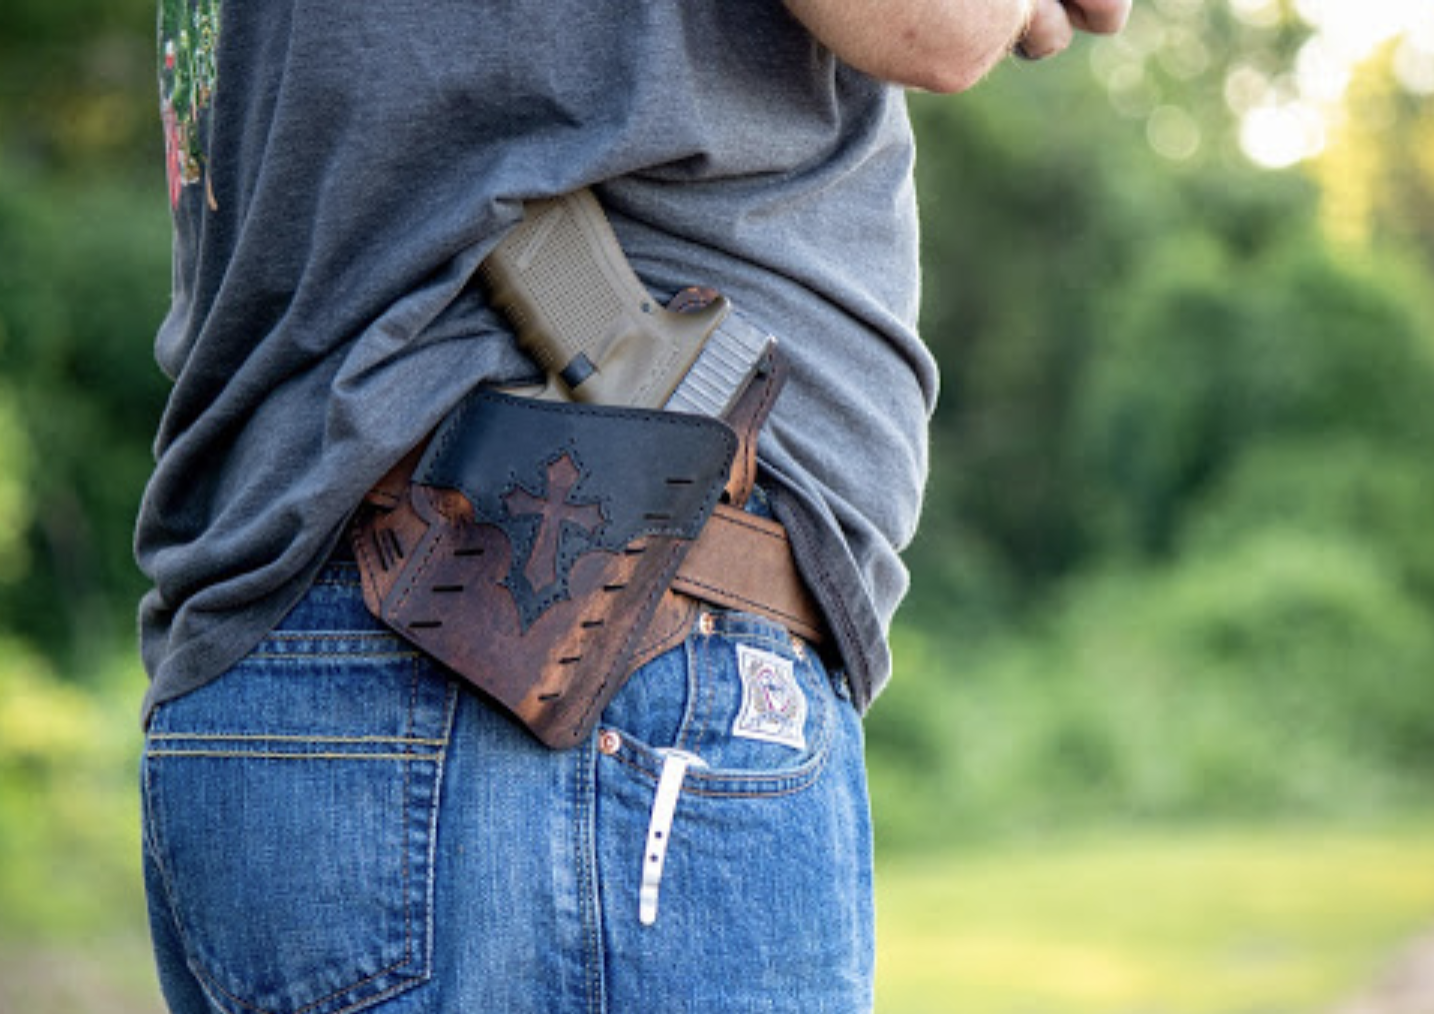 Buying a Holster